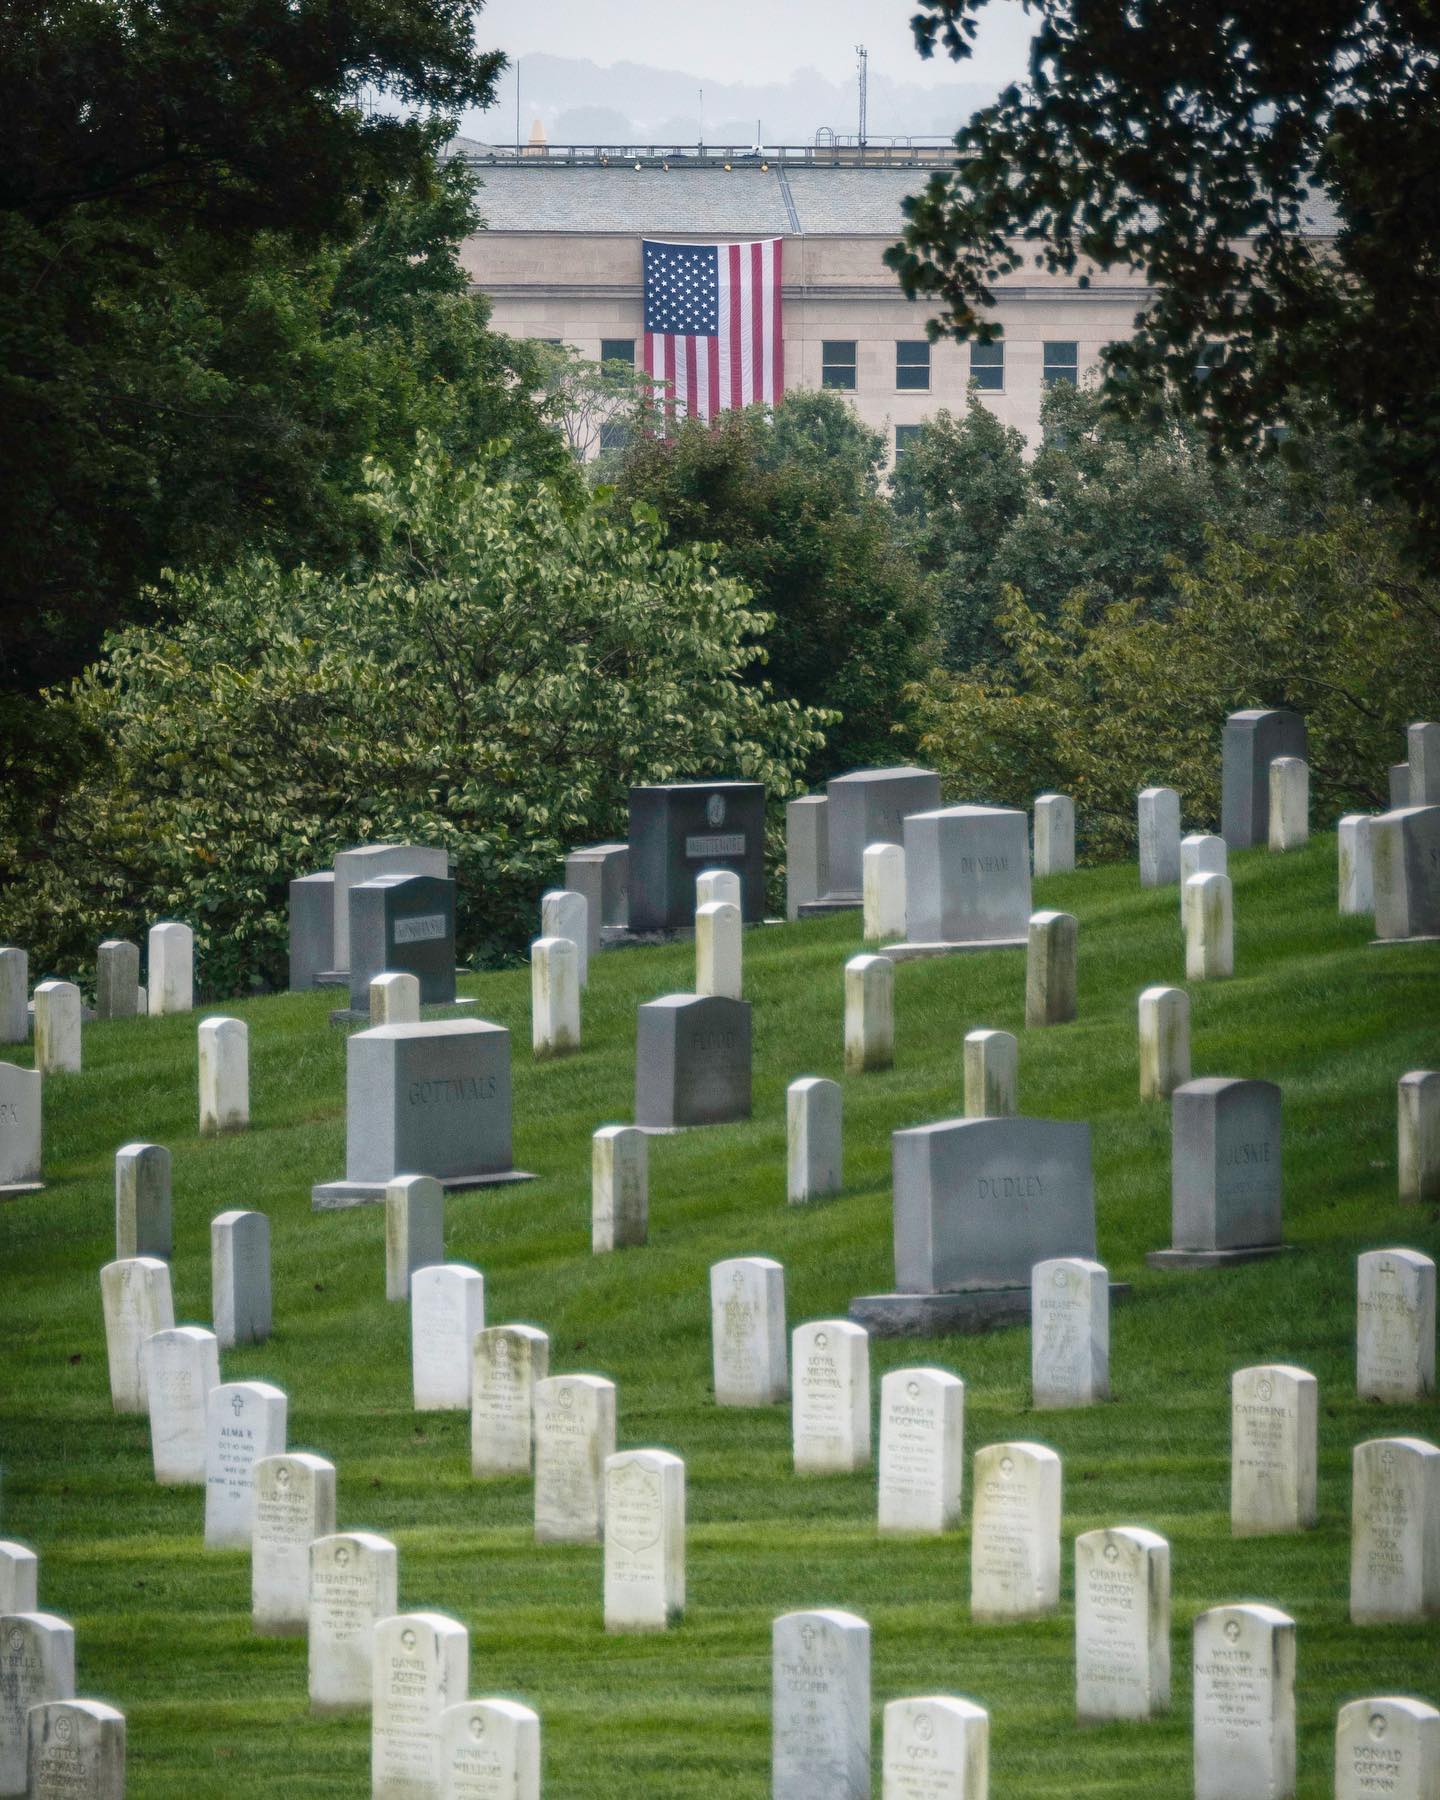 Flags are seen throughout Washington DC, the Pentagon, and Arlington today in remembrance of all those that lost their lives on 9/11.